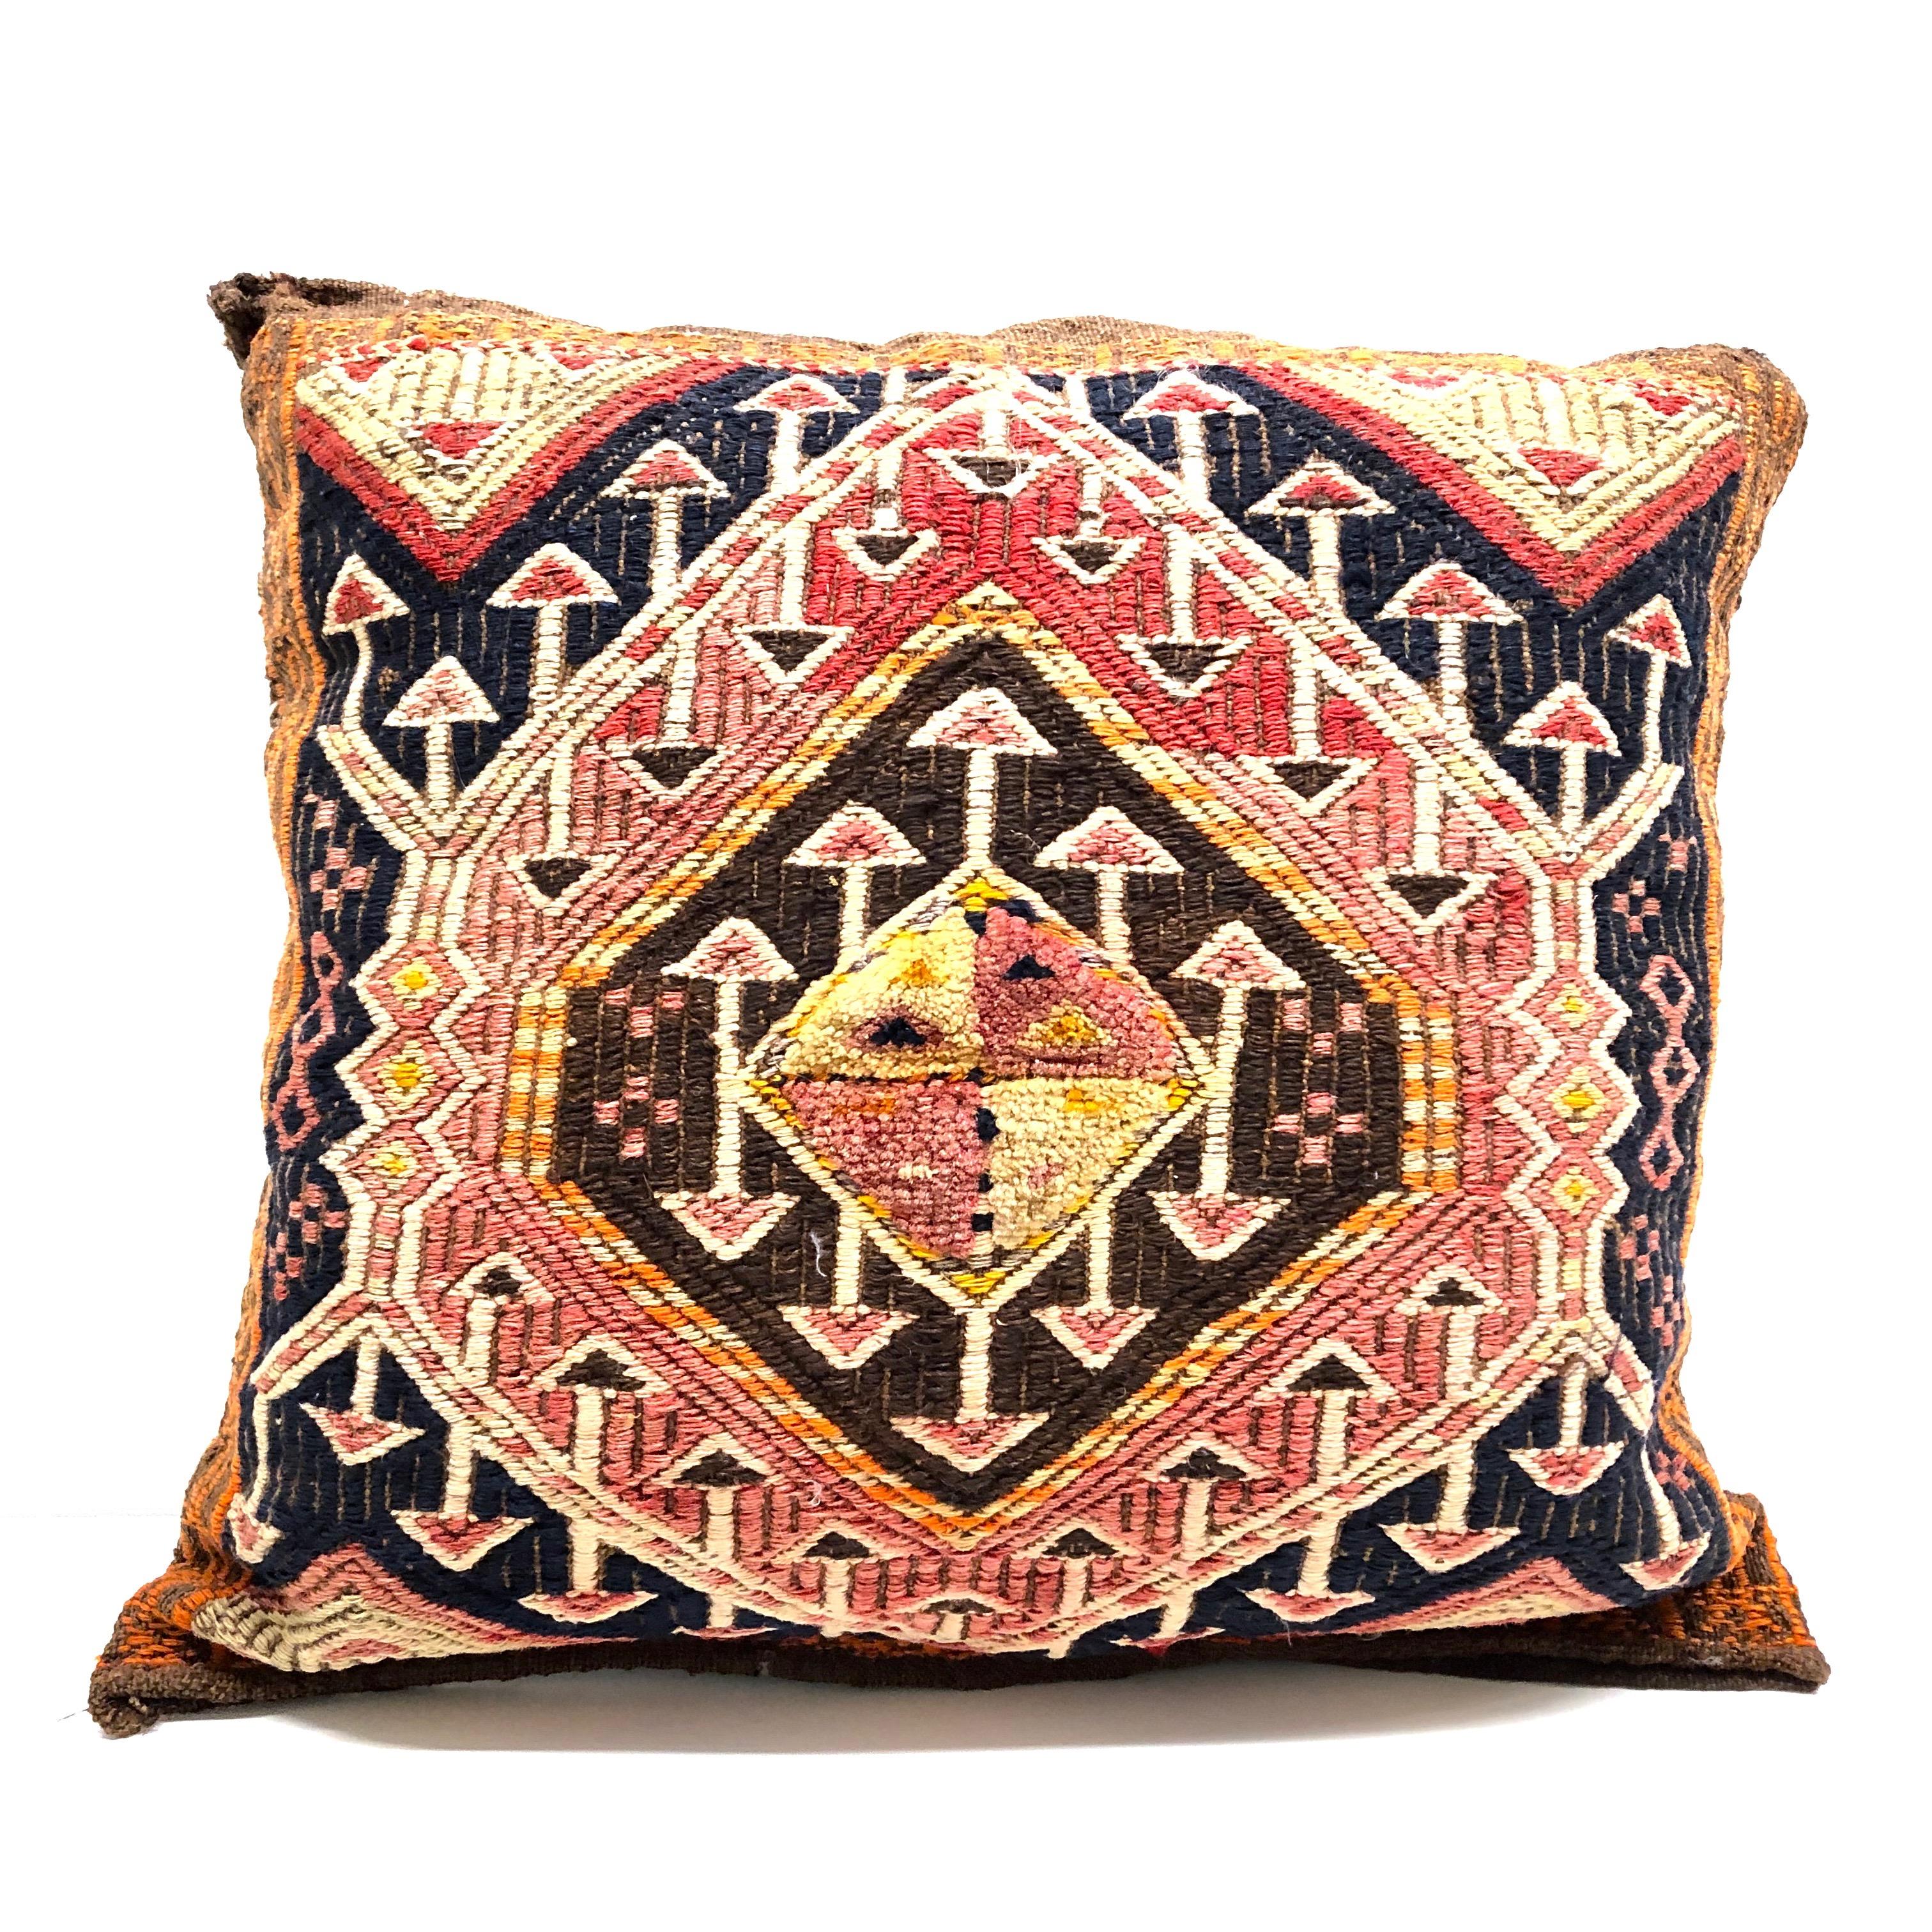 Pair of Gypsy Turkish Oriental Salt Bag or Rug Embroidery Pillows For Sale 1